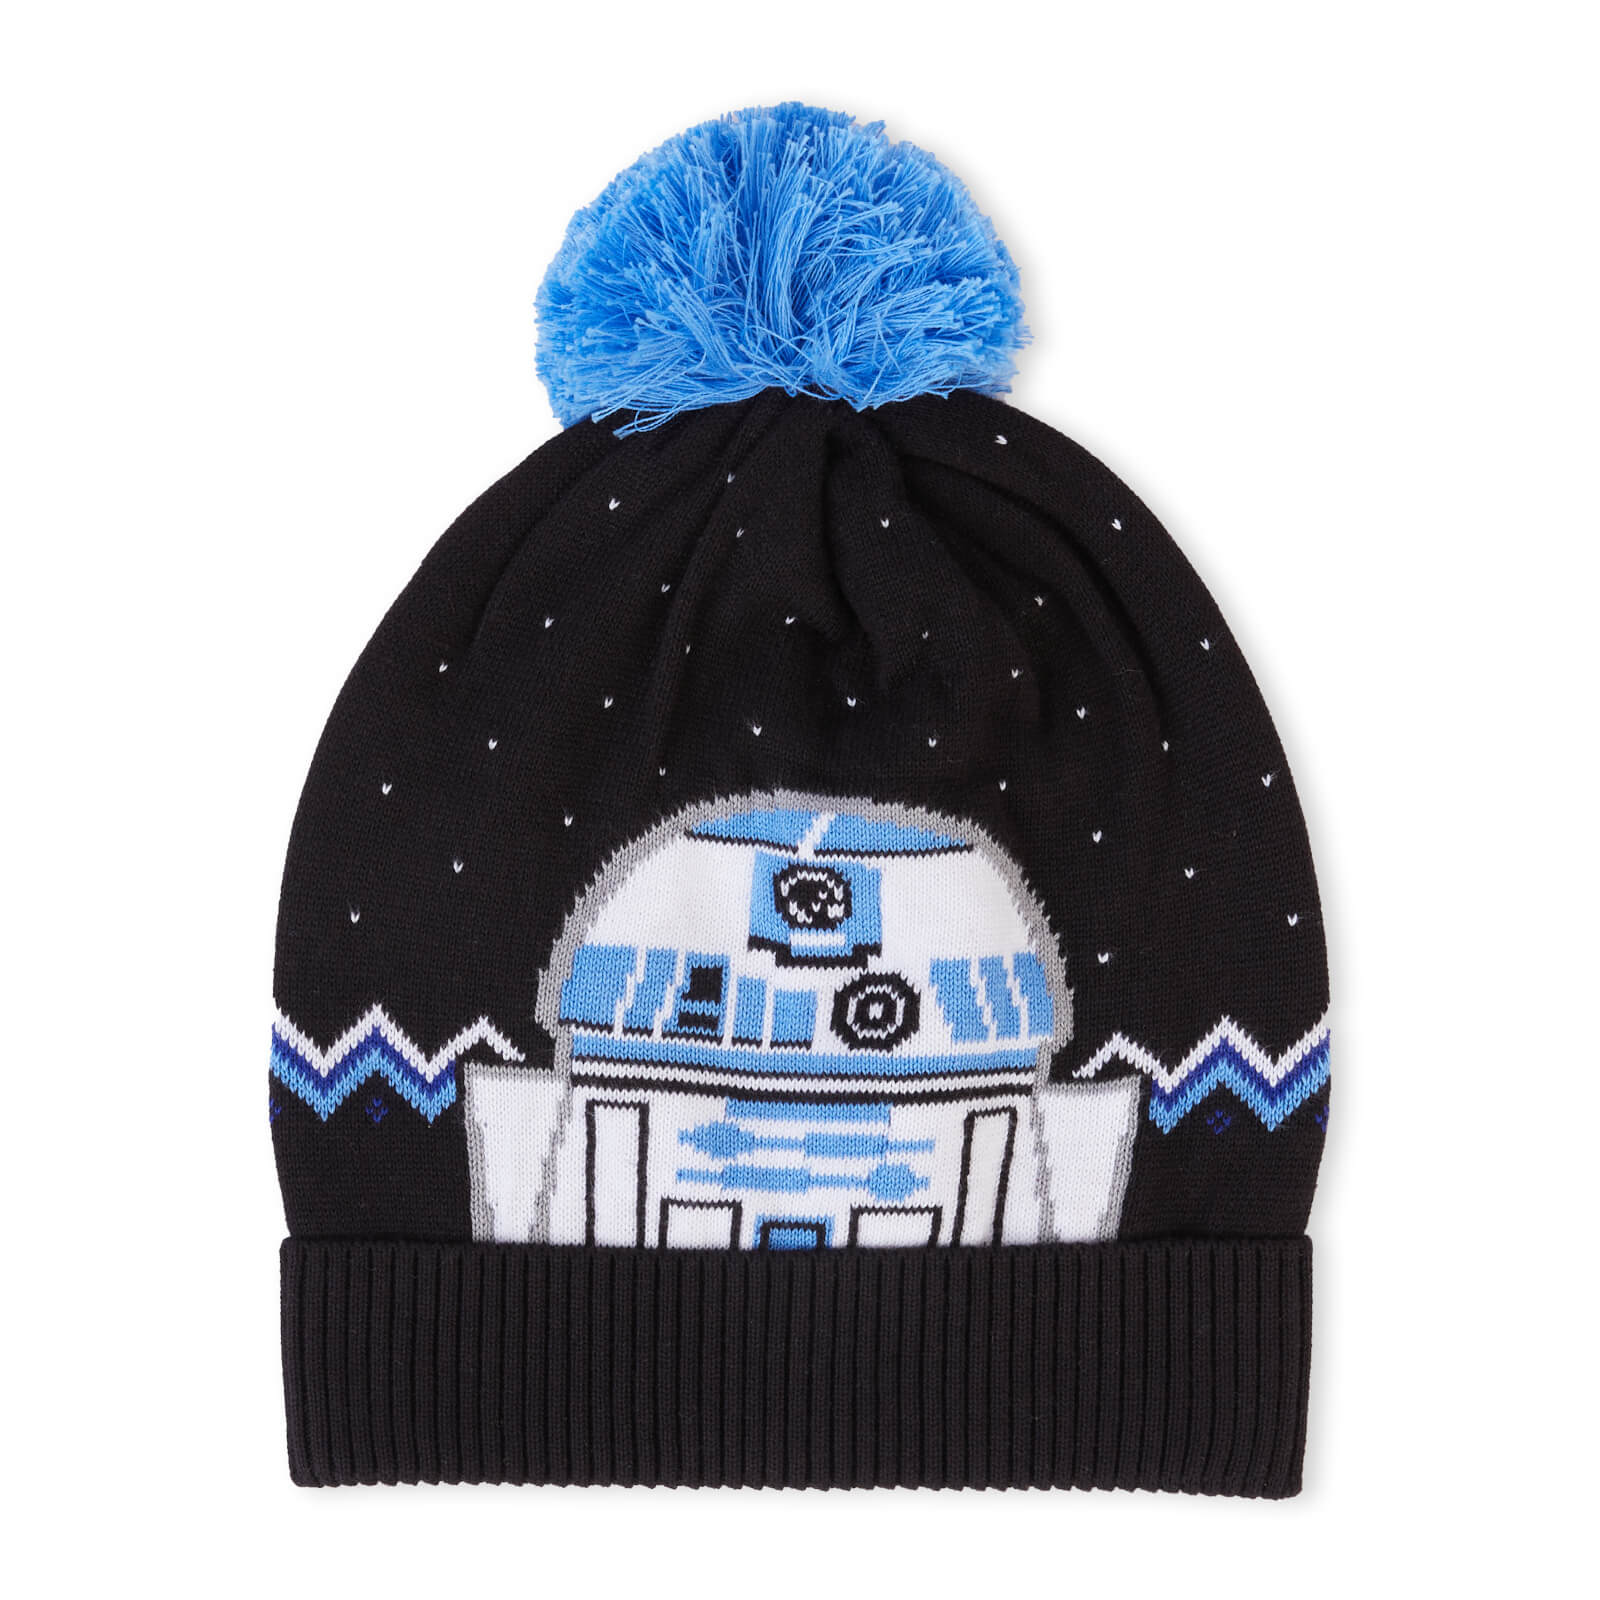 Merry Force Be With You Christmas Beanie Black